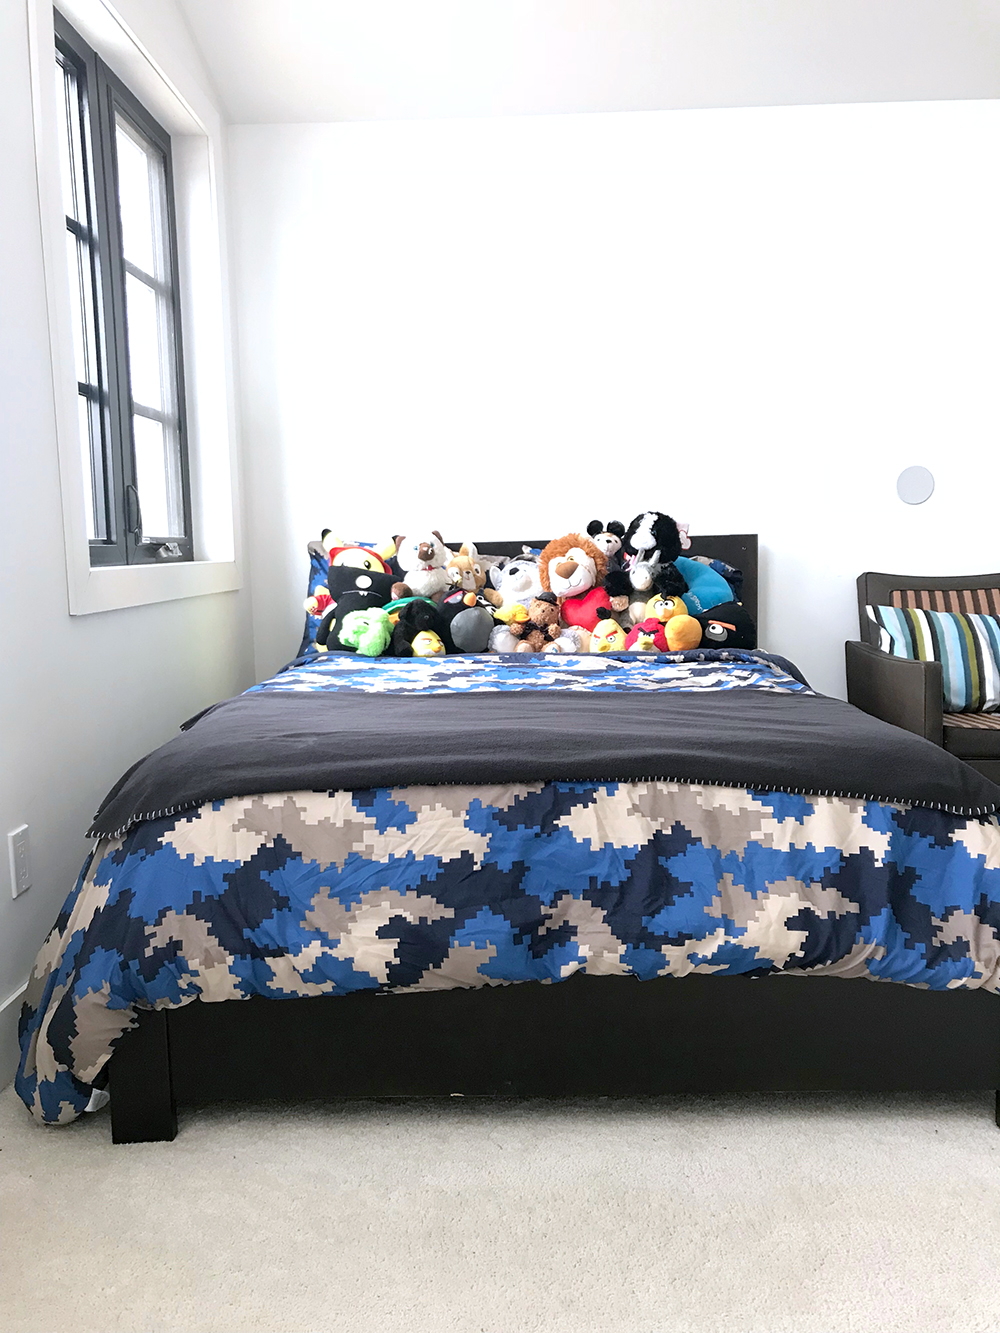 Boys bedroom before: a bed full of stuffed animals provides the only colour in the room